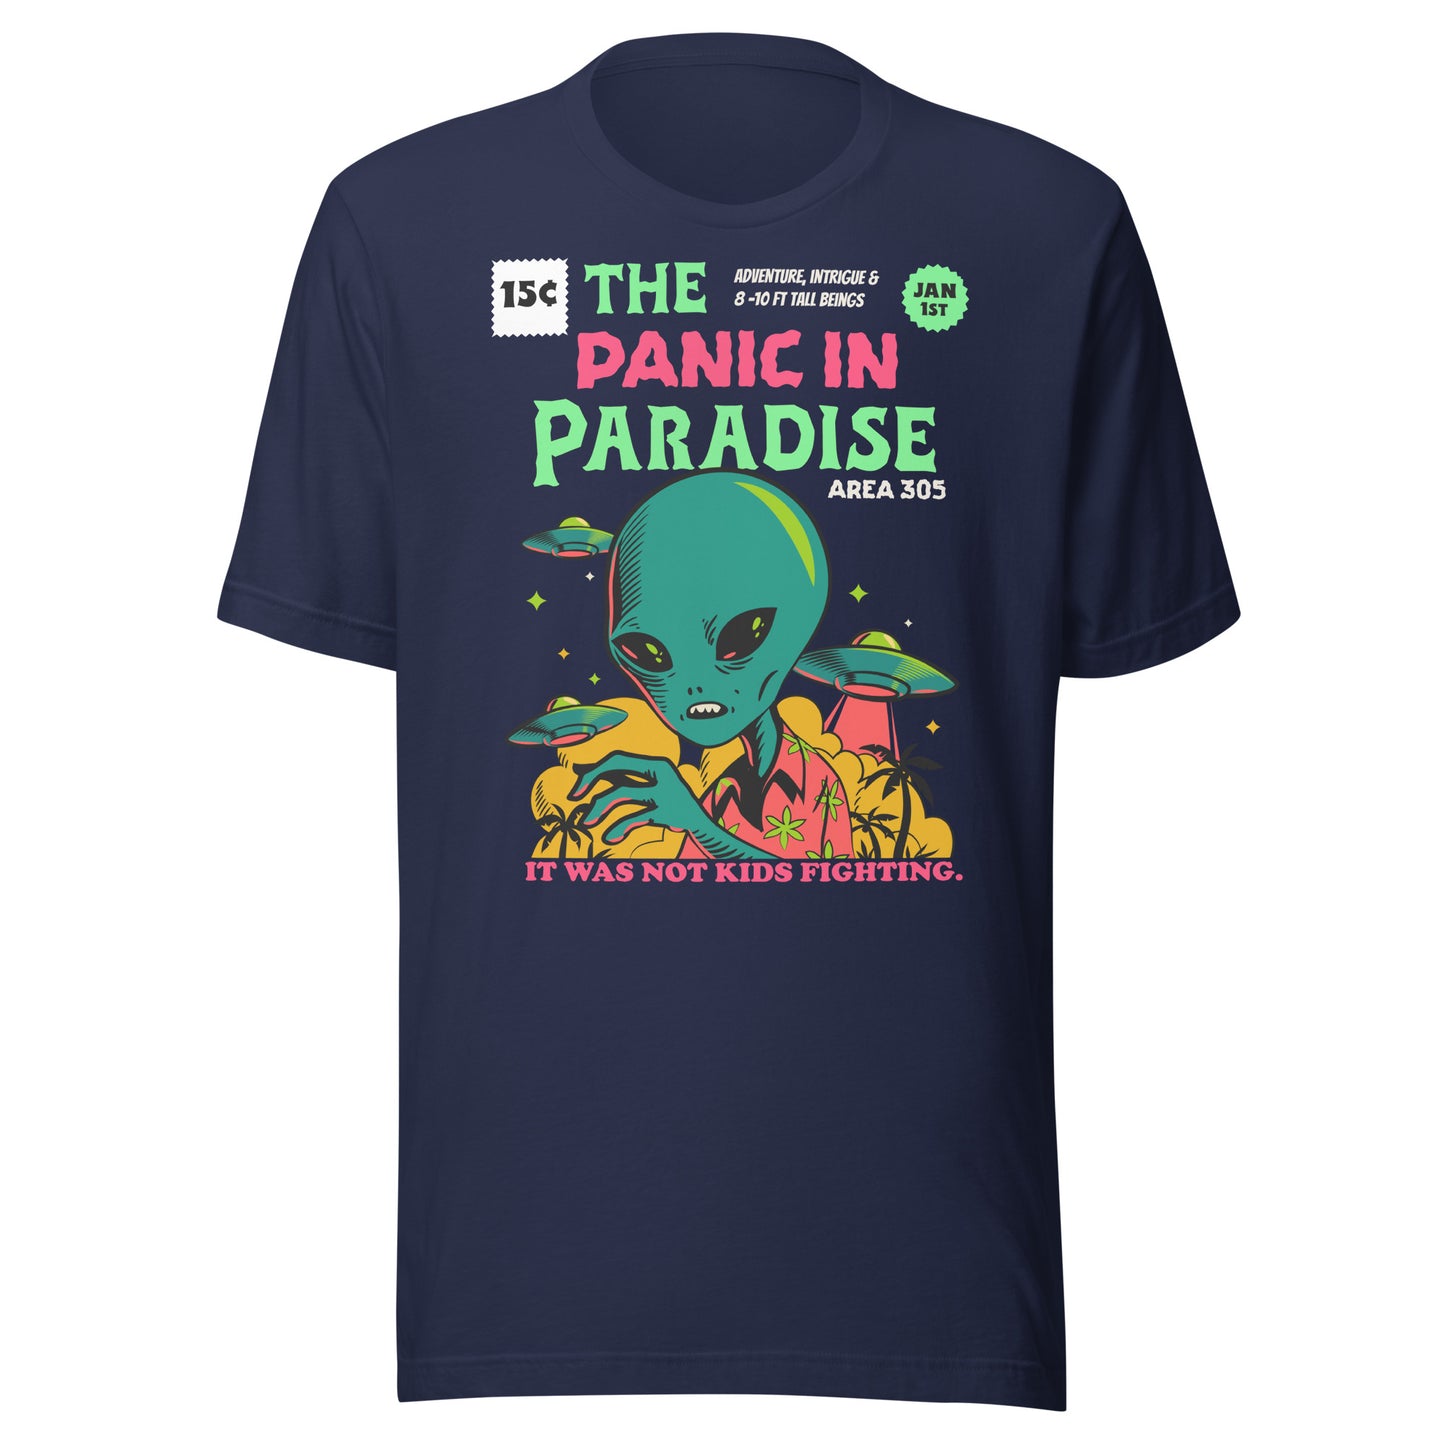 The Panic in Paradise